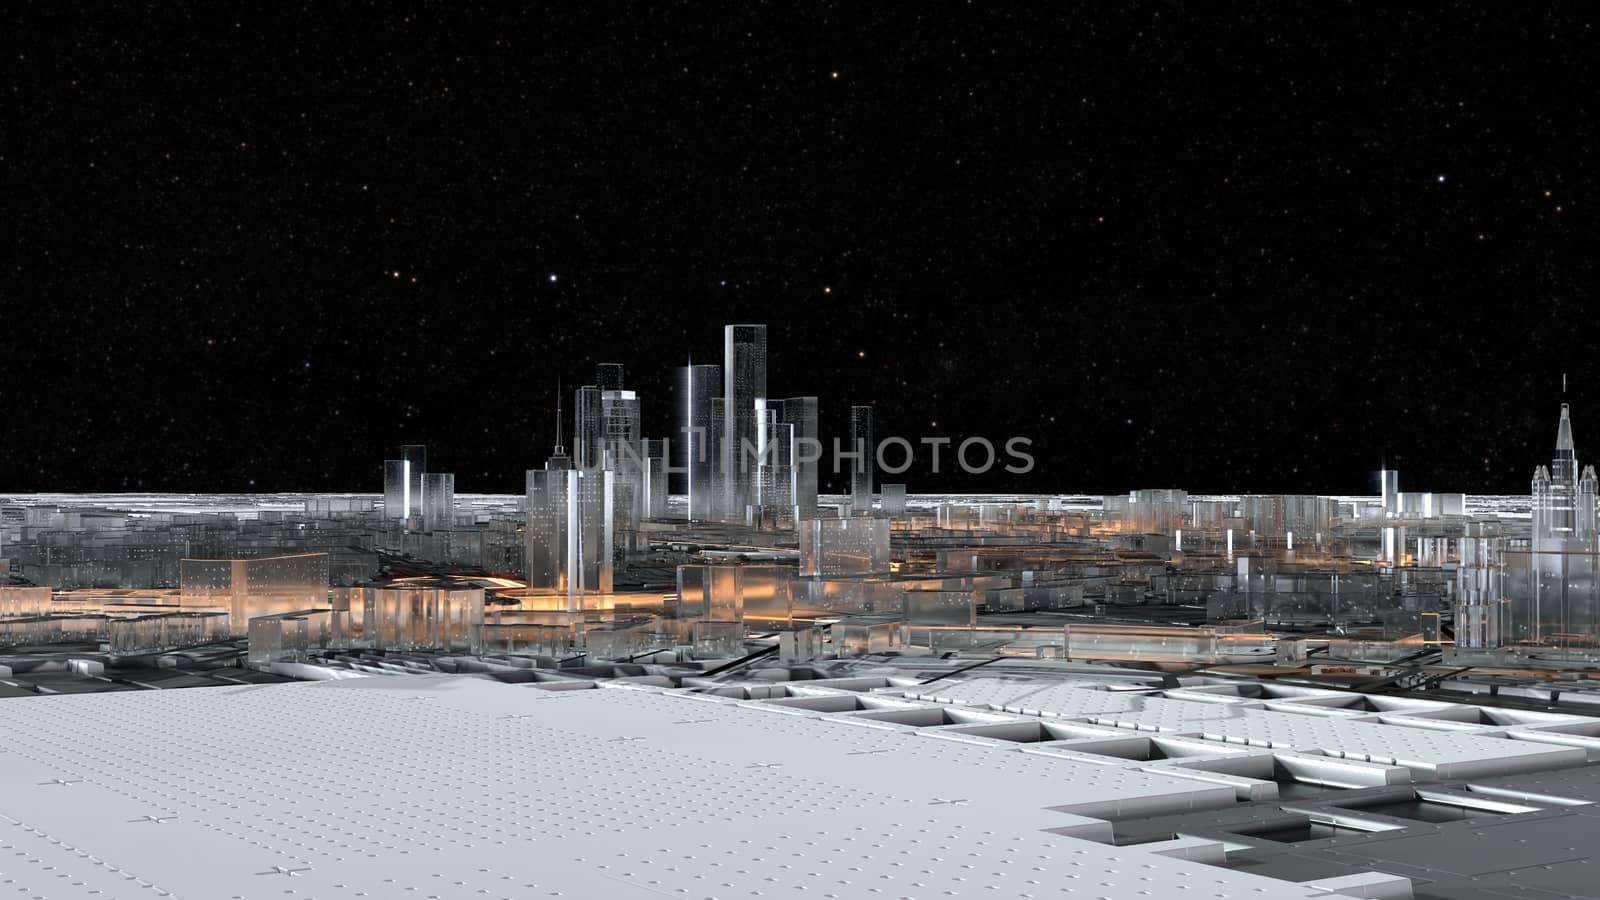 Abstract 3D city of glass with luminous roads on the surface imitating a spaceship. 3D illustration. The concept of a future city. Element of this image furnished by NASA